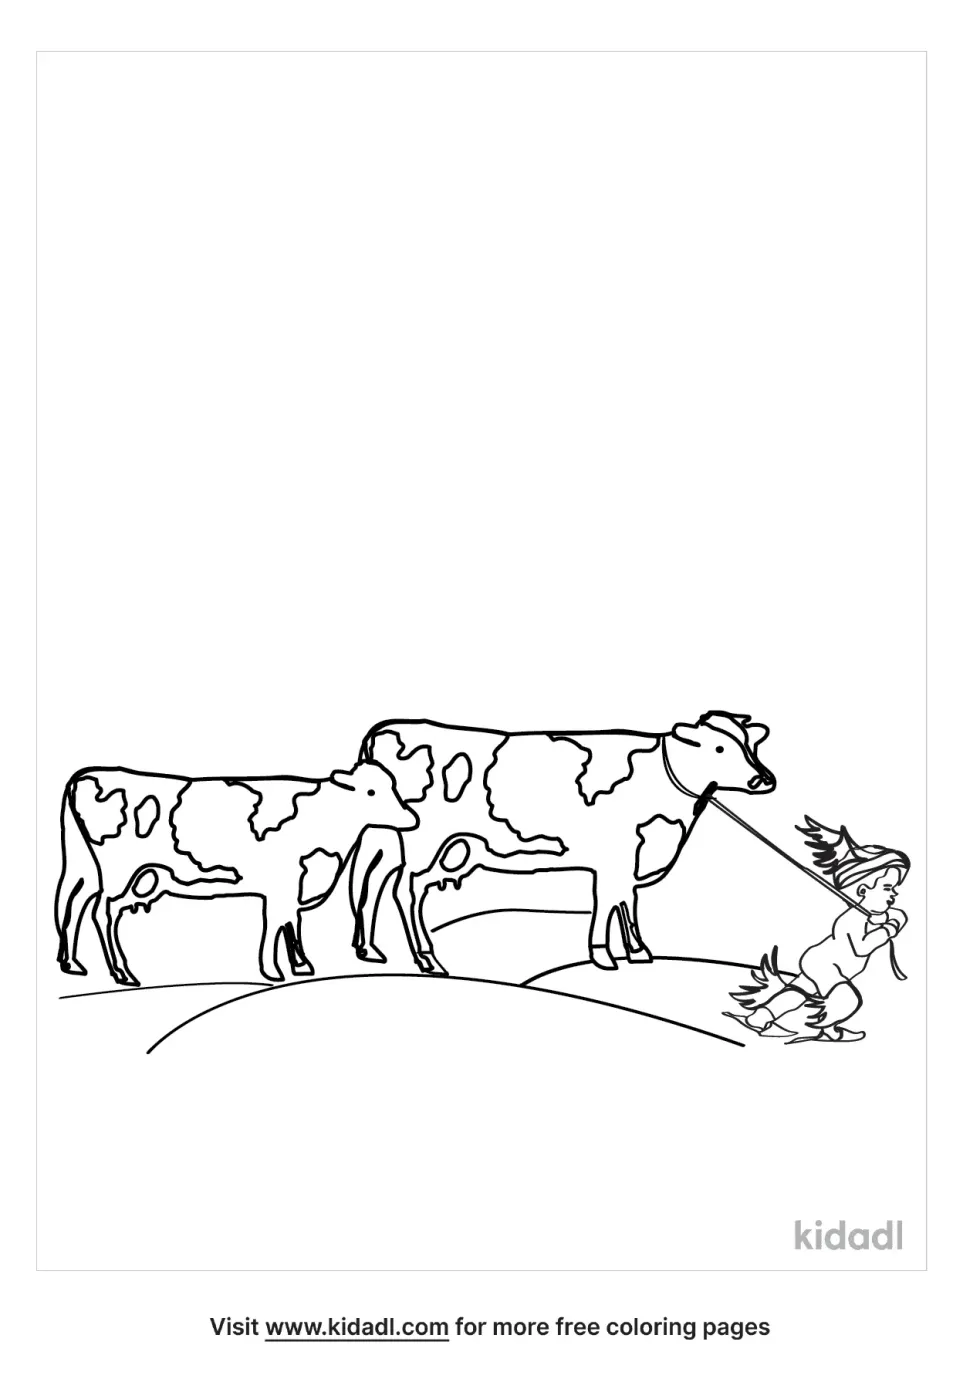 Hermes And The Cows Coloring Page